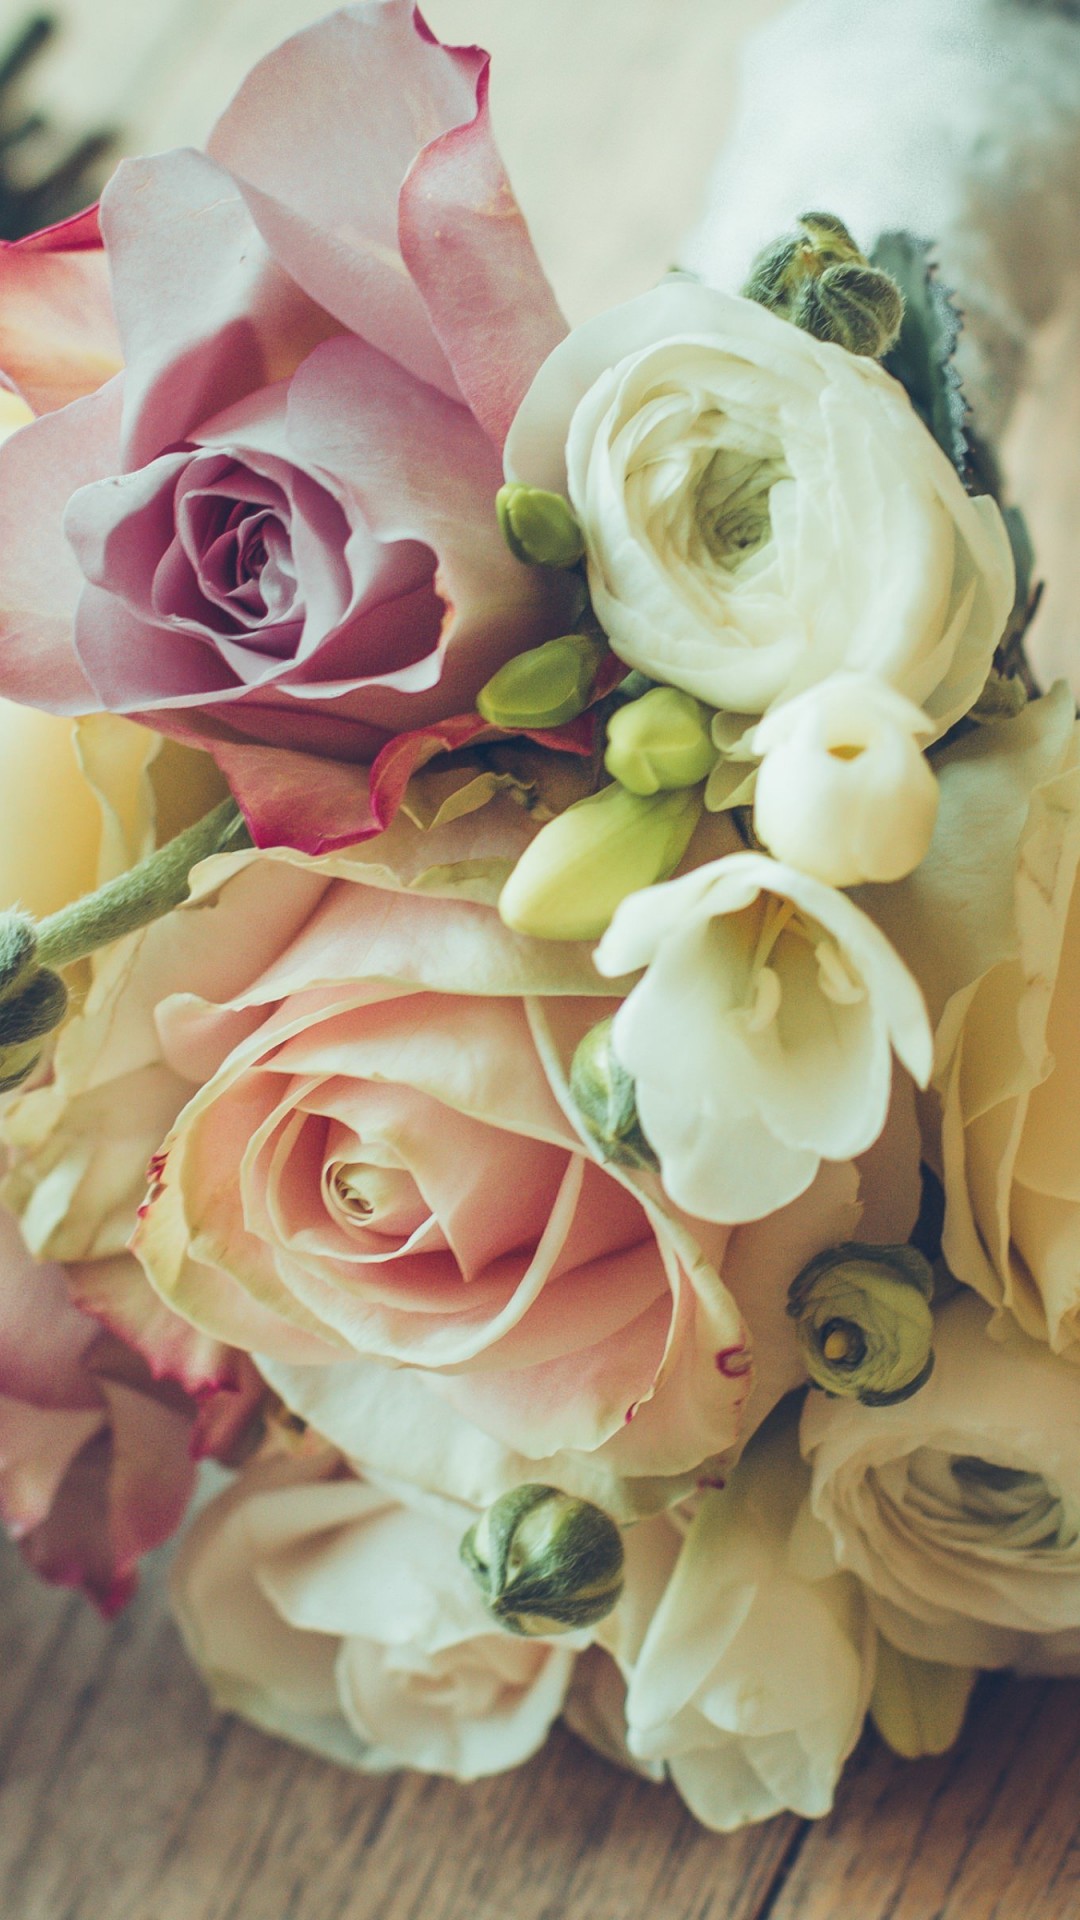 Roses Bouquet Composition Wallpaper for HTC One